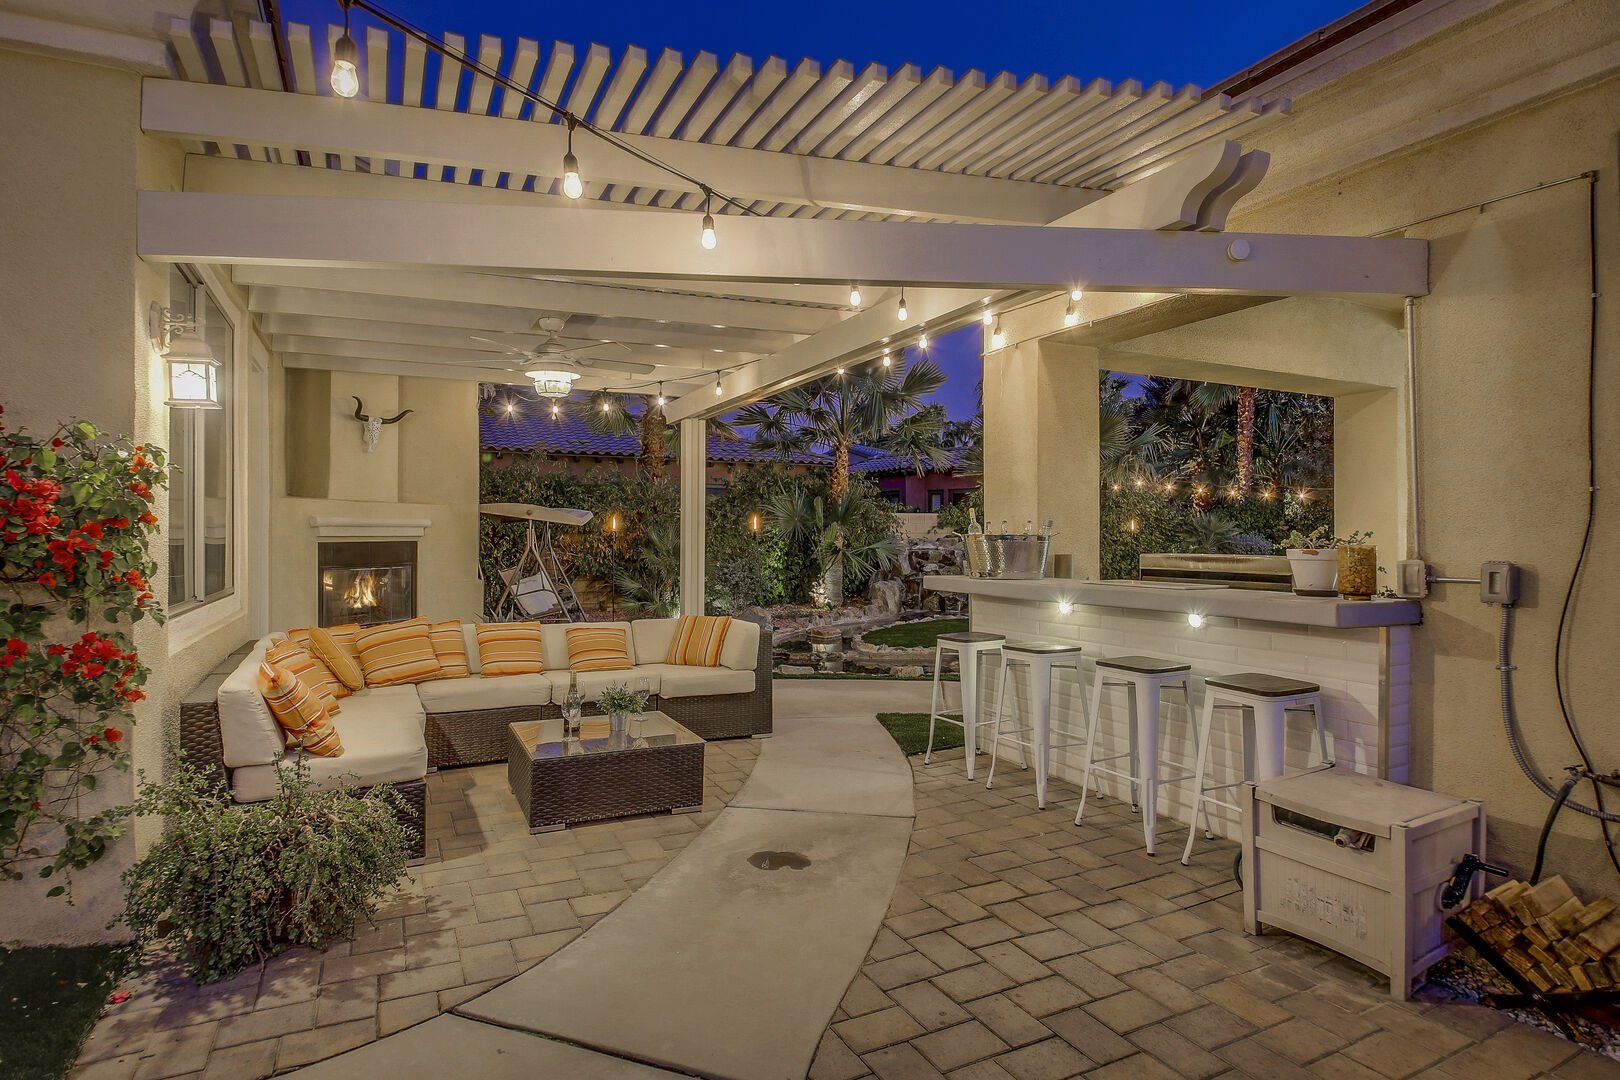 The perfect hang out spot is located near the pool. Room for the whole family on the comfortable patio couch and seating for four at the bar top.